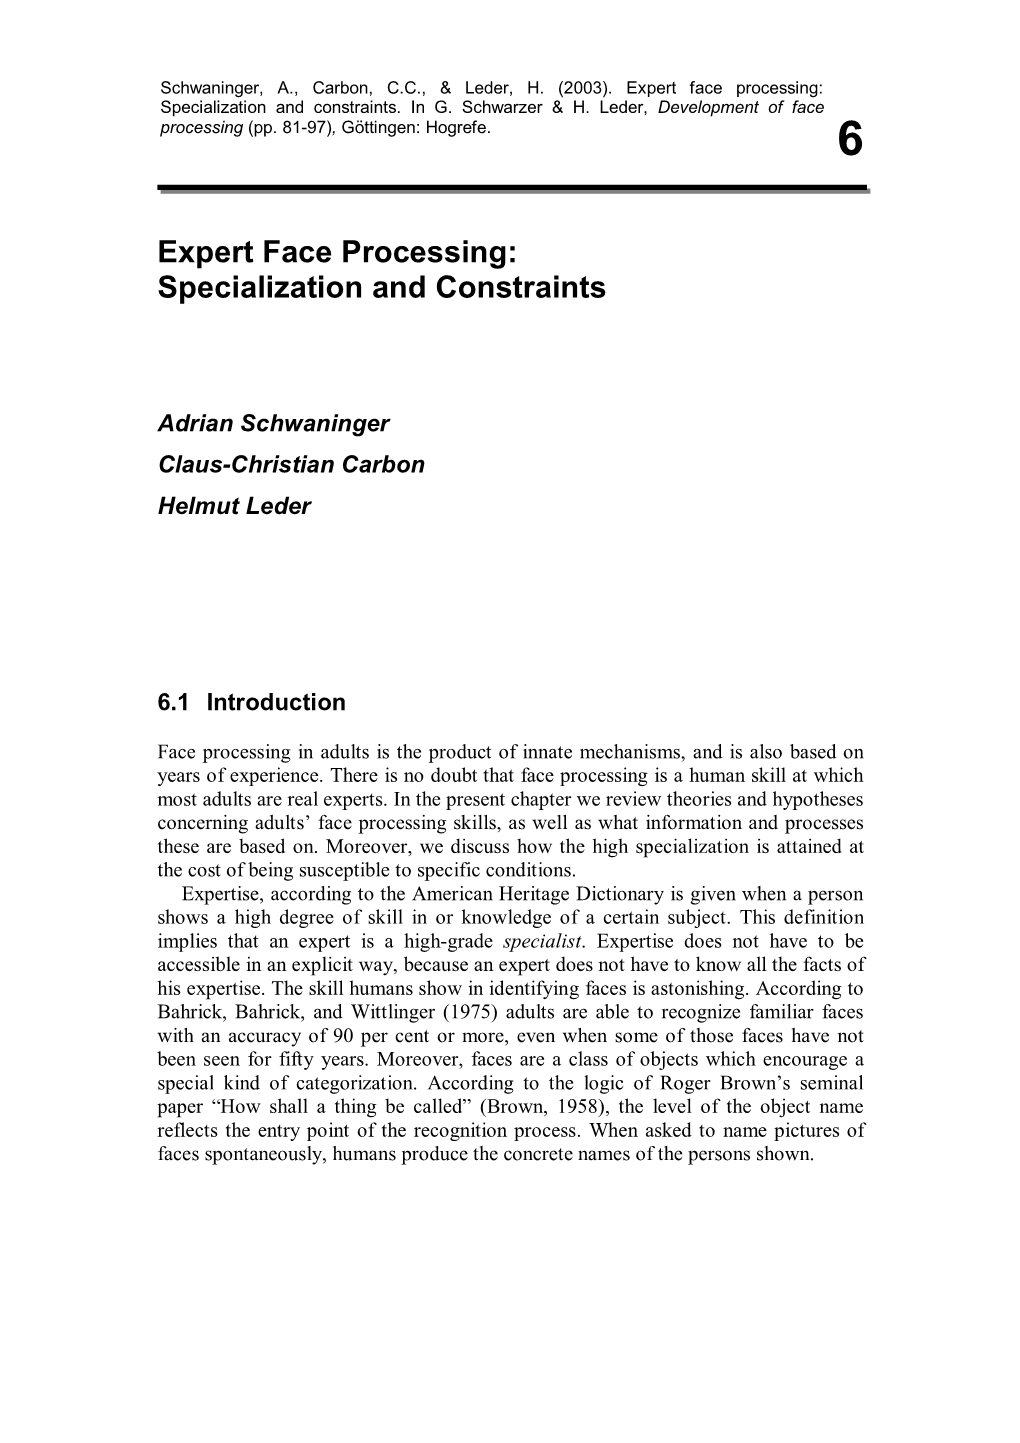 Expert Face Processing: Specialization and Constraints